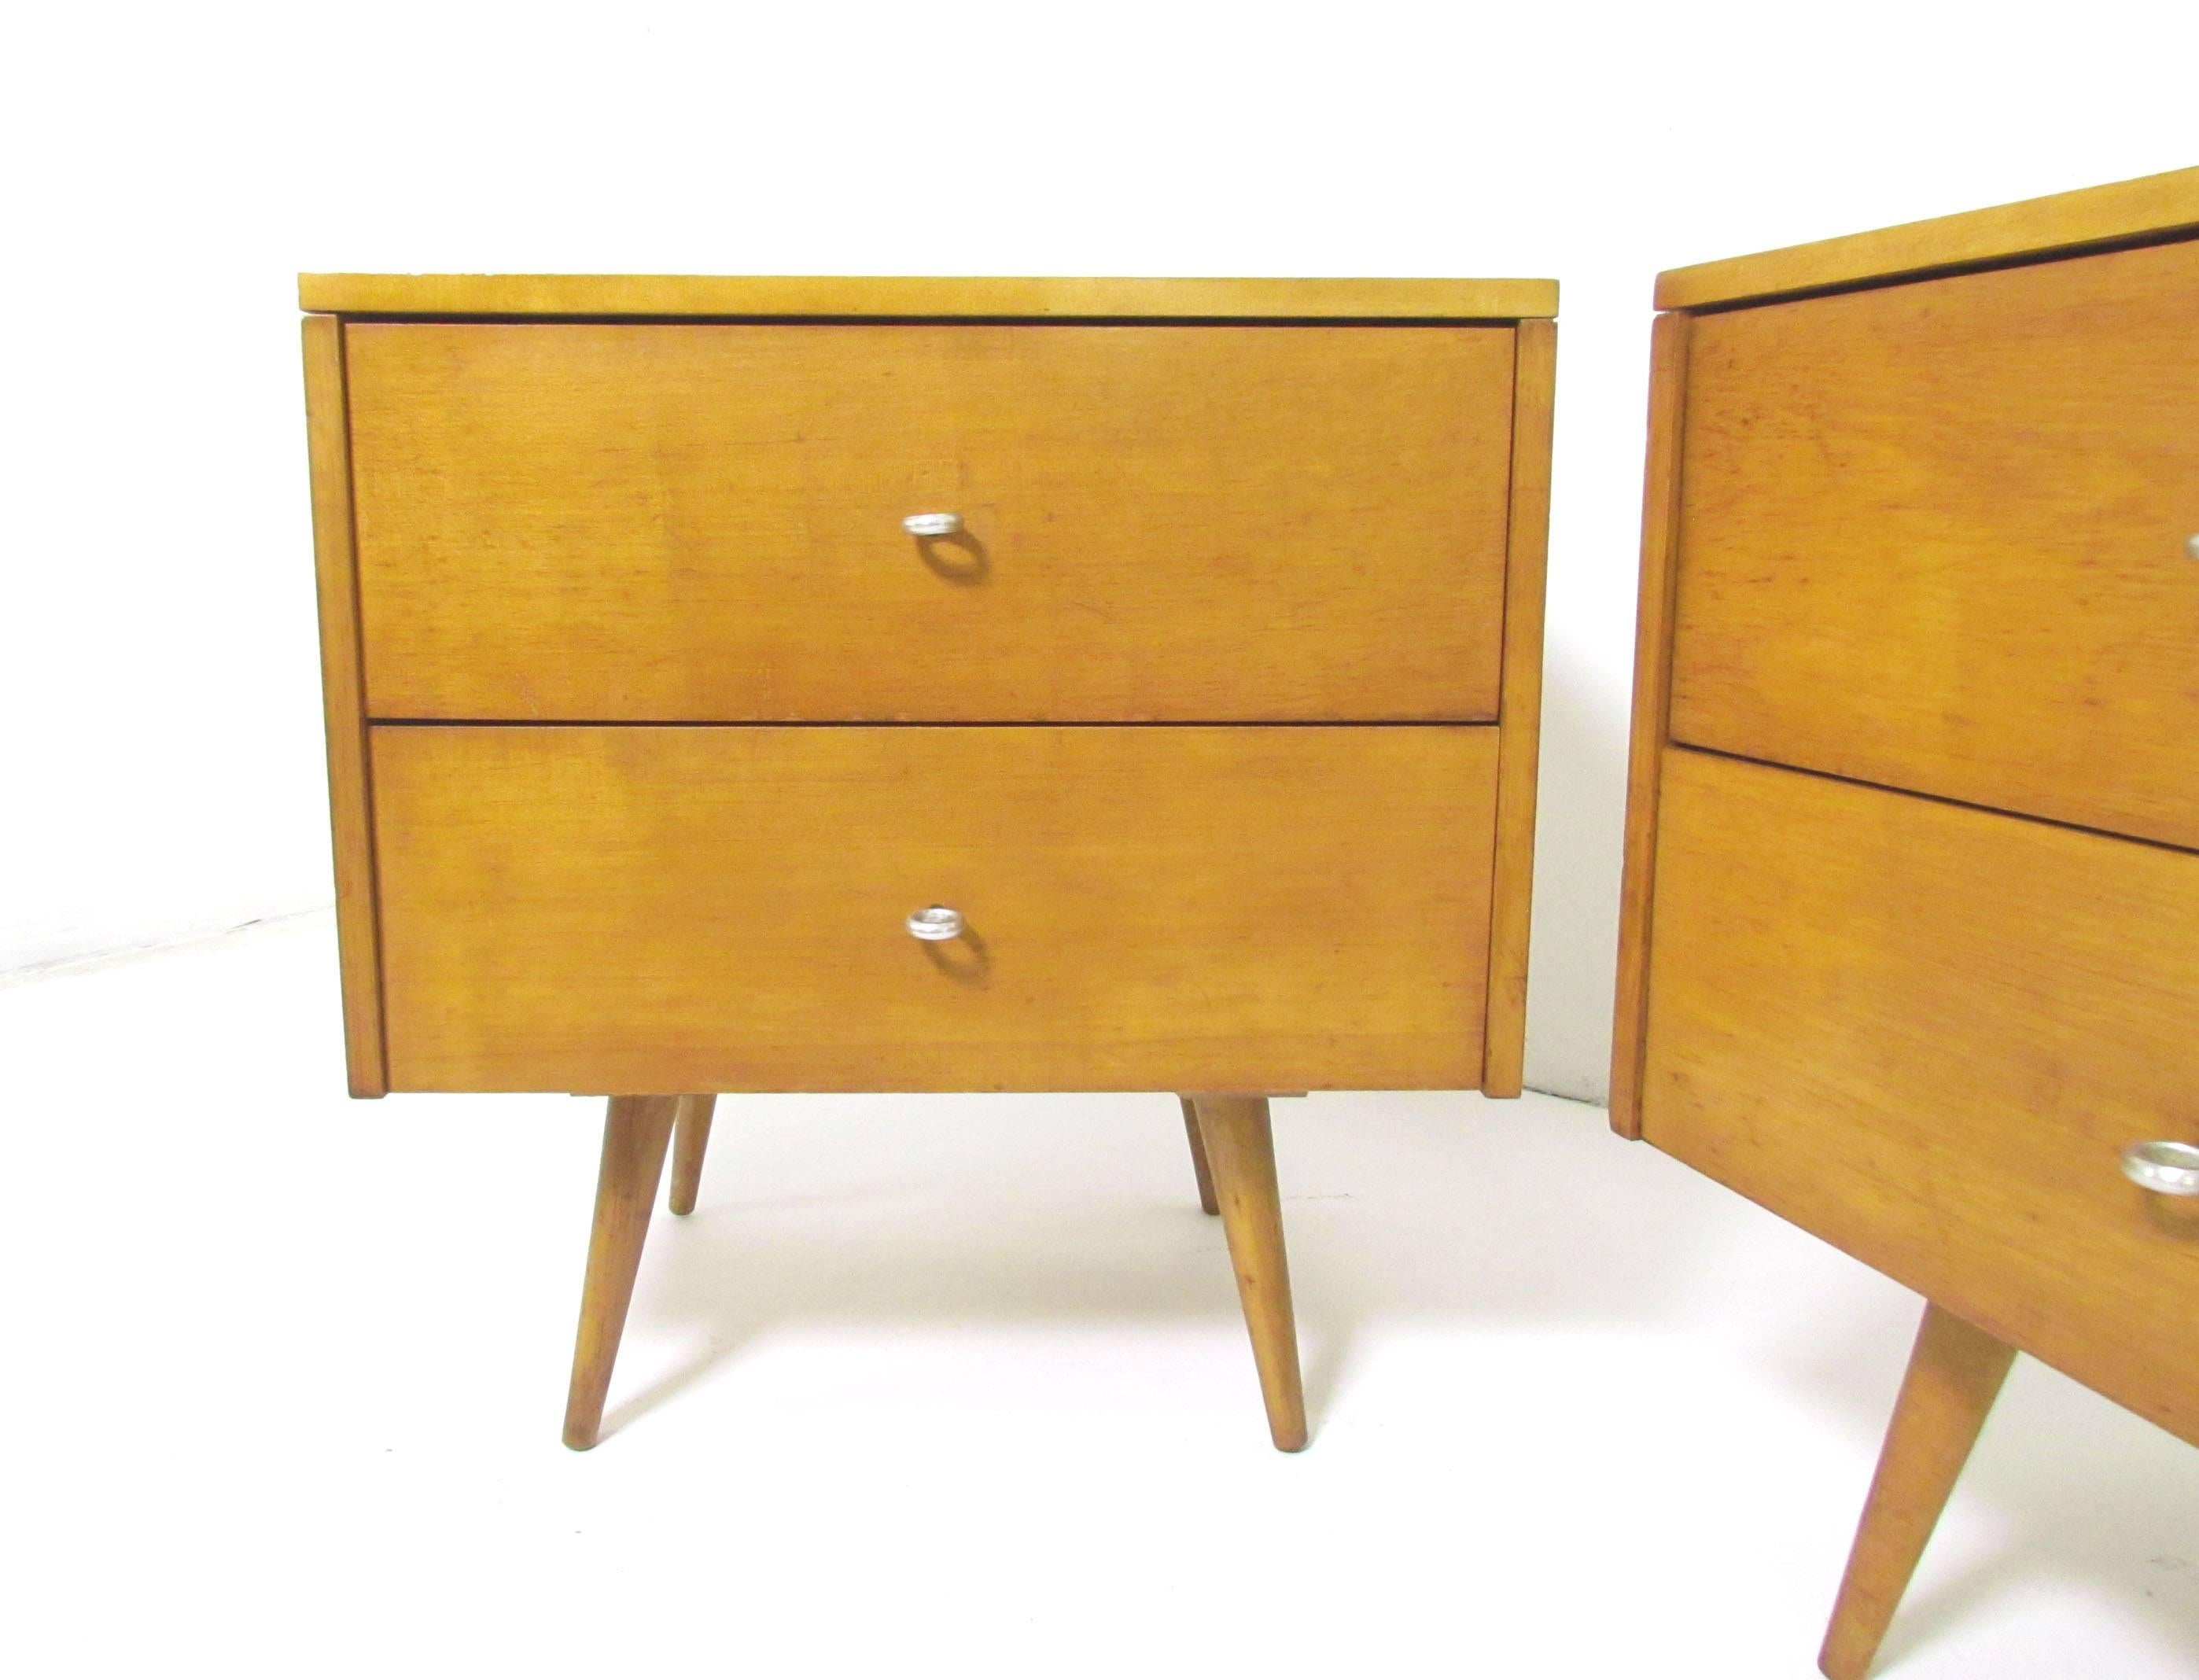 Pair of nightstands or two-drawer cabinets with ring pulls, designed by Paul McCobb for Planner Group, Winchendon Furniture Co., circa 1950s.